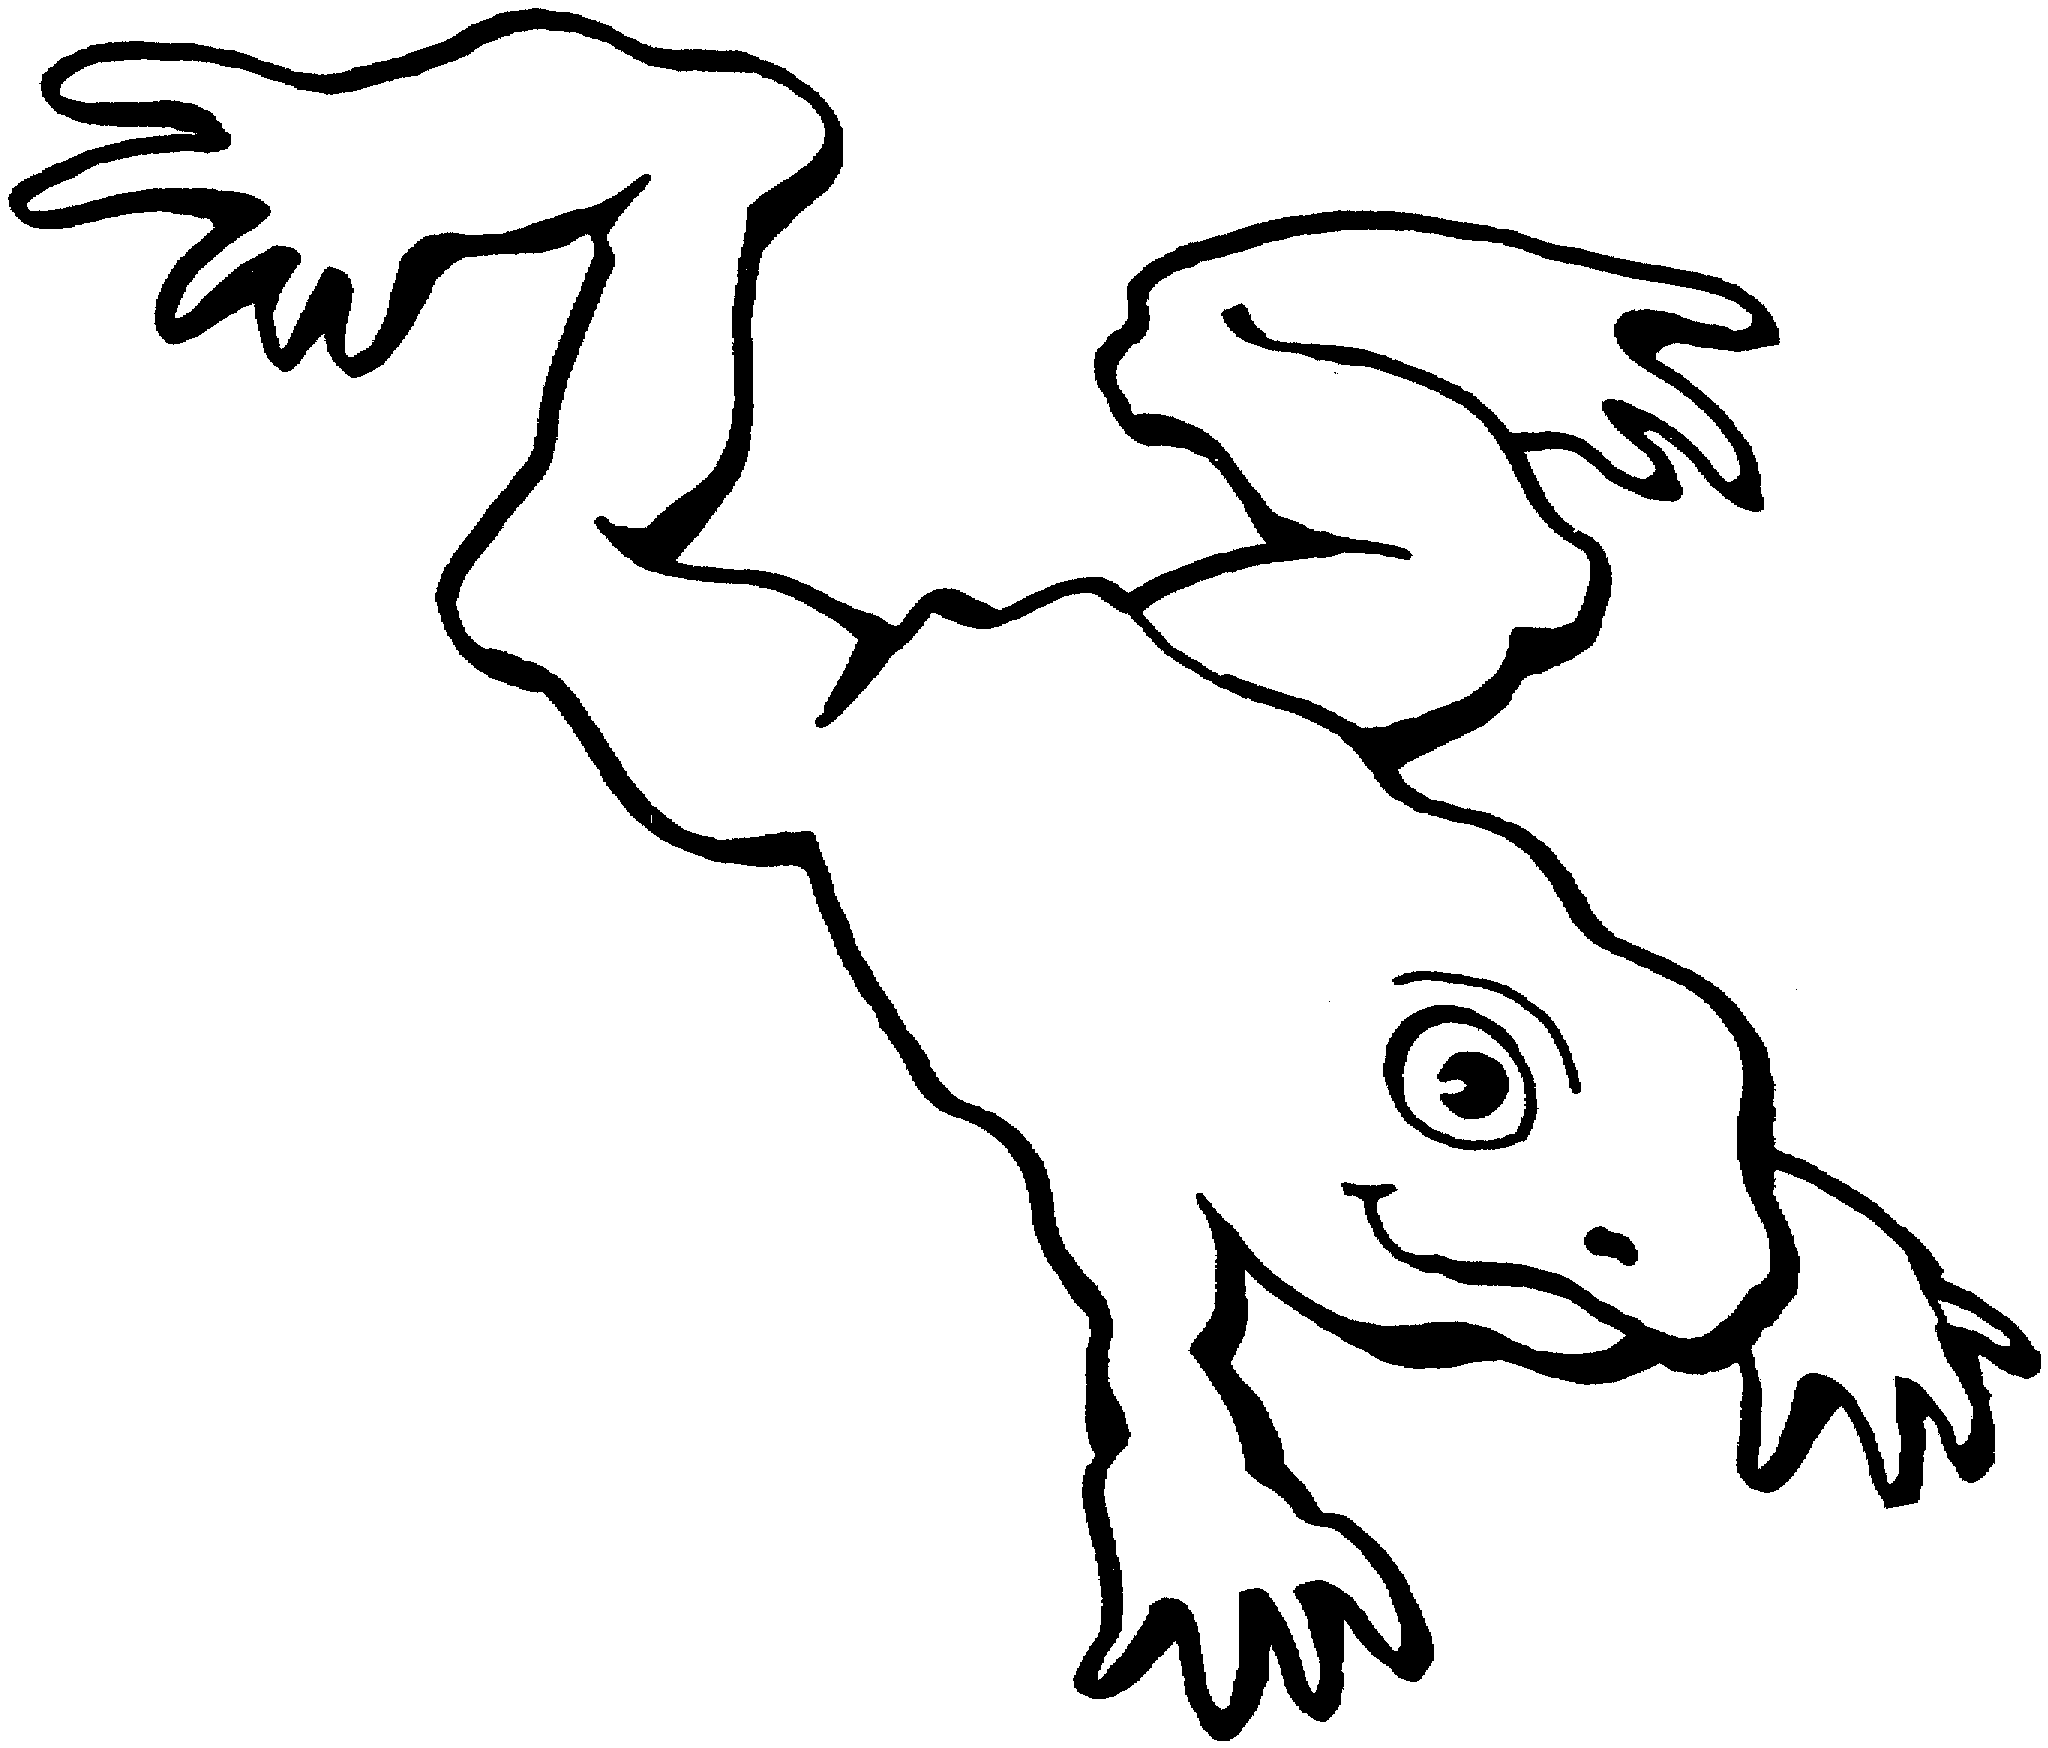 Black and white clipart frog jumping